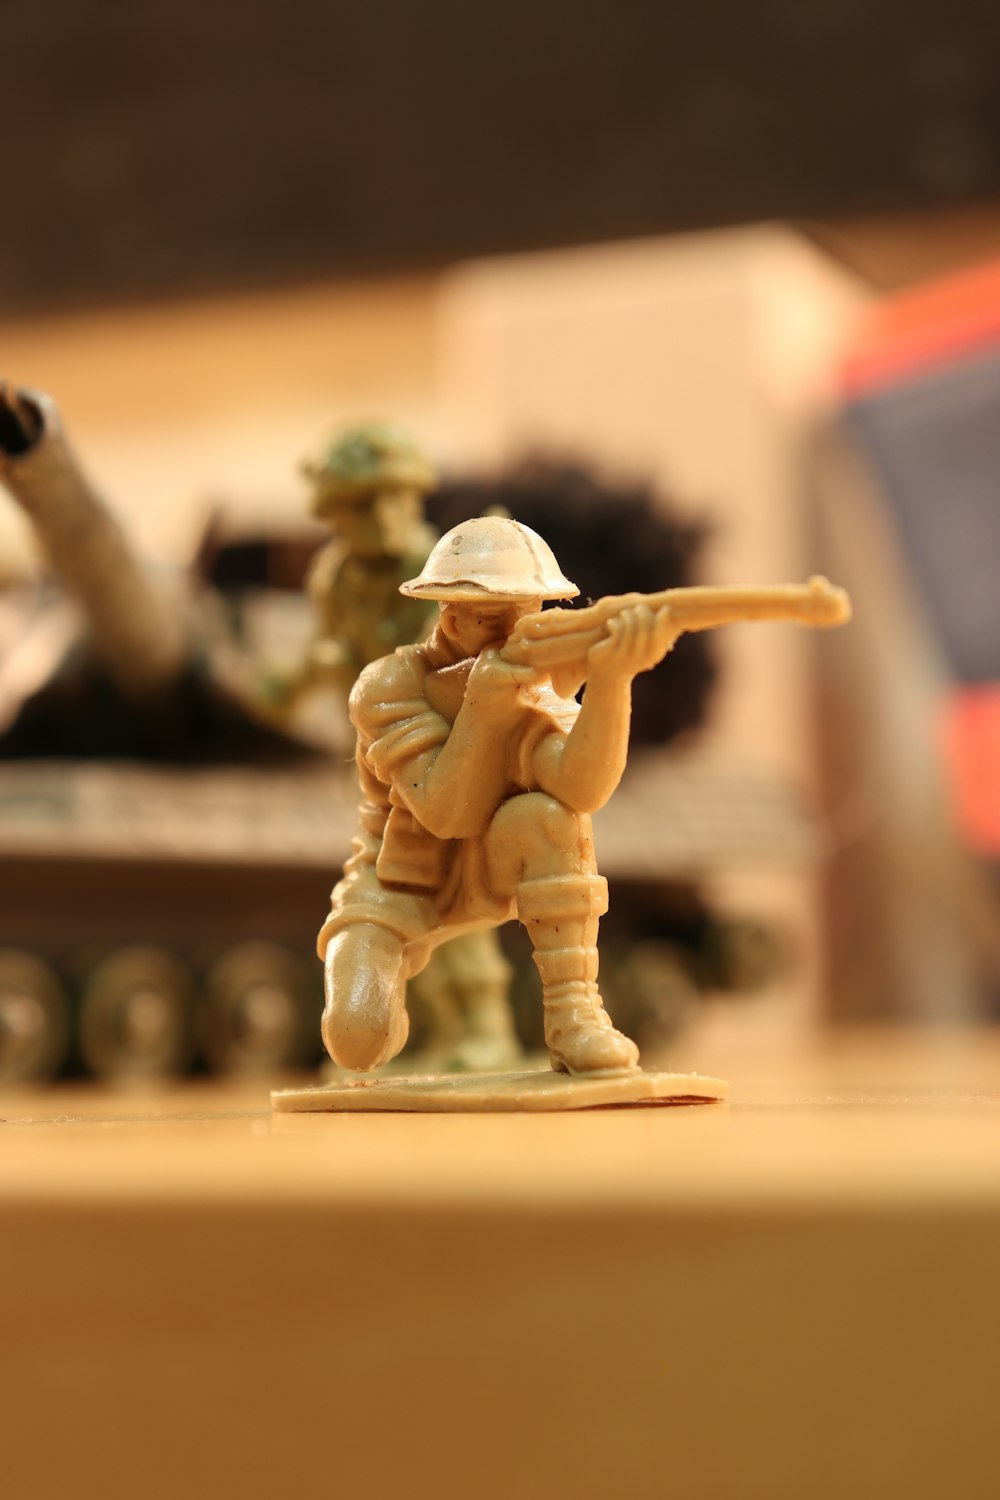 Toy Soldier Pictures  Download Free Images on Unsplash